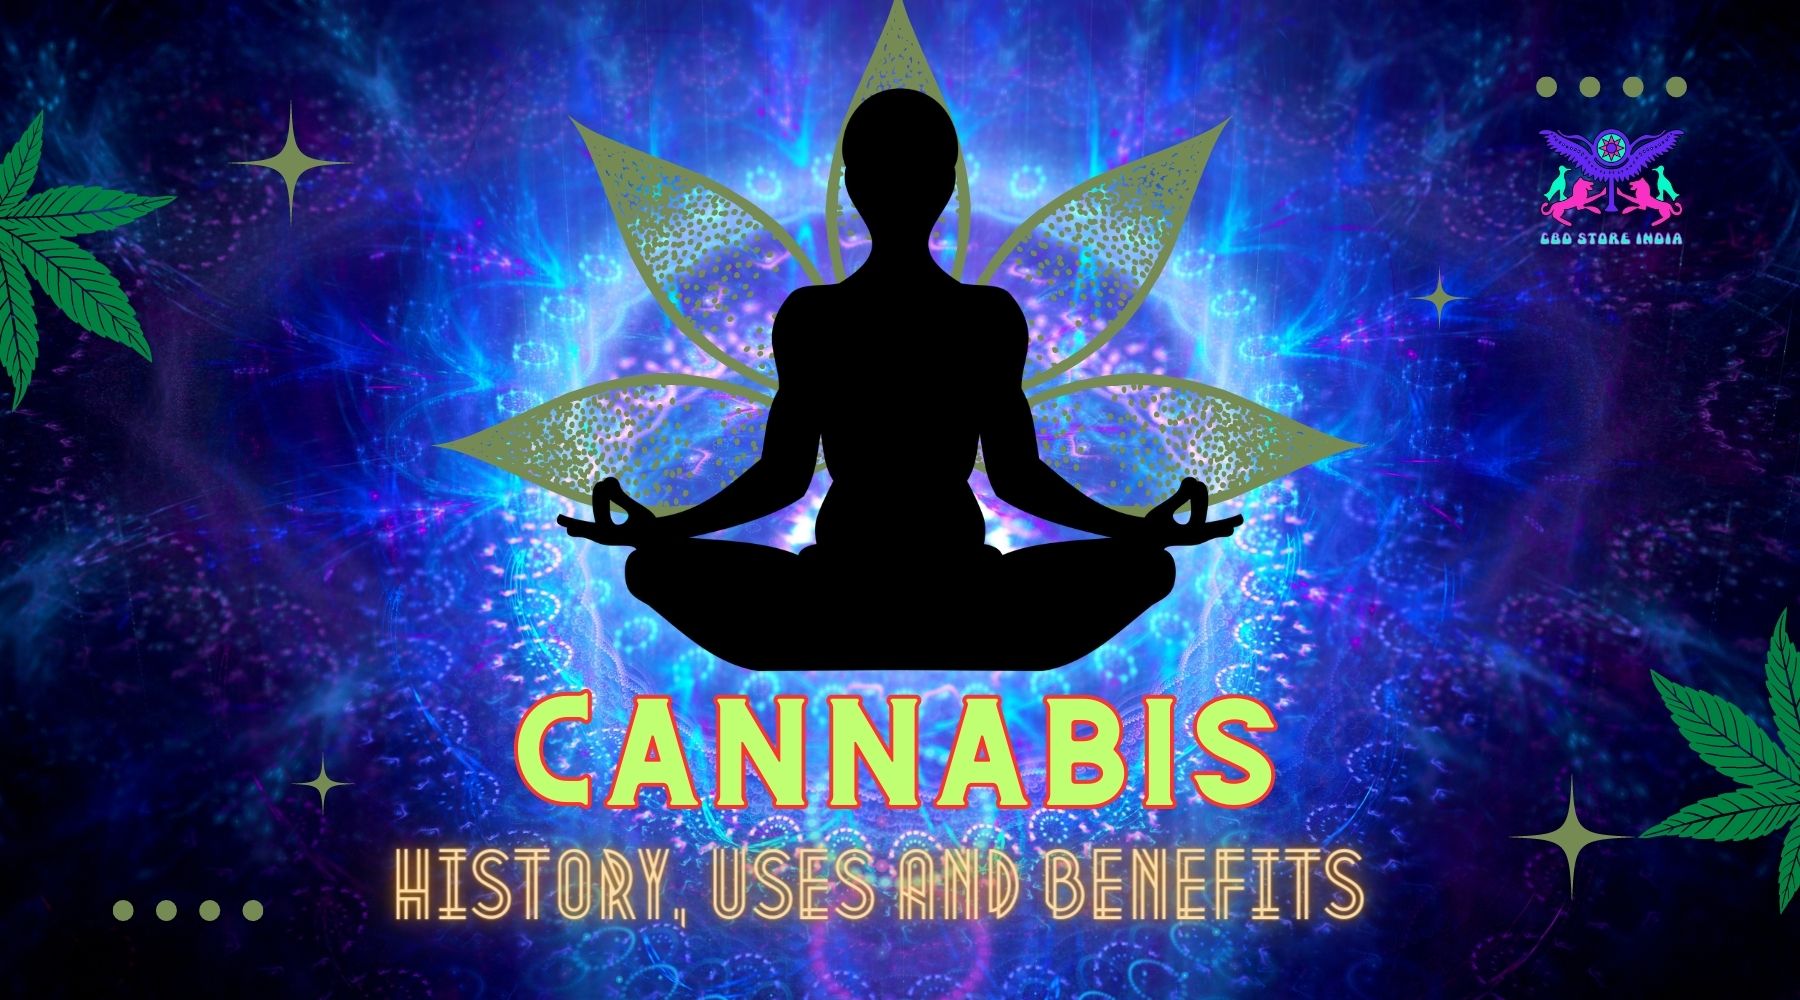 A Comprehensive Guide to Cannabis Use Through Human History and its Benefits - CBD Store India